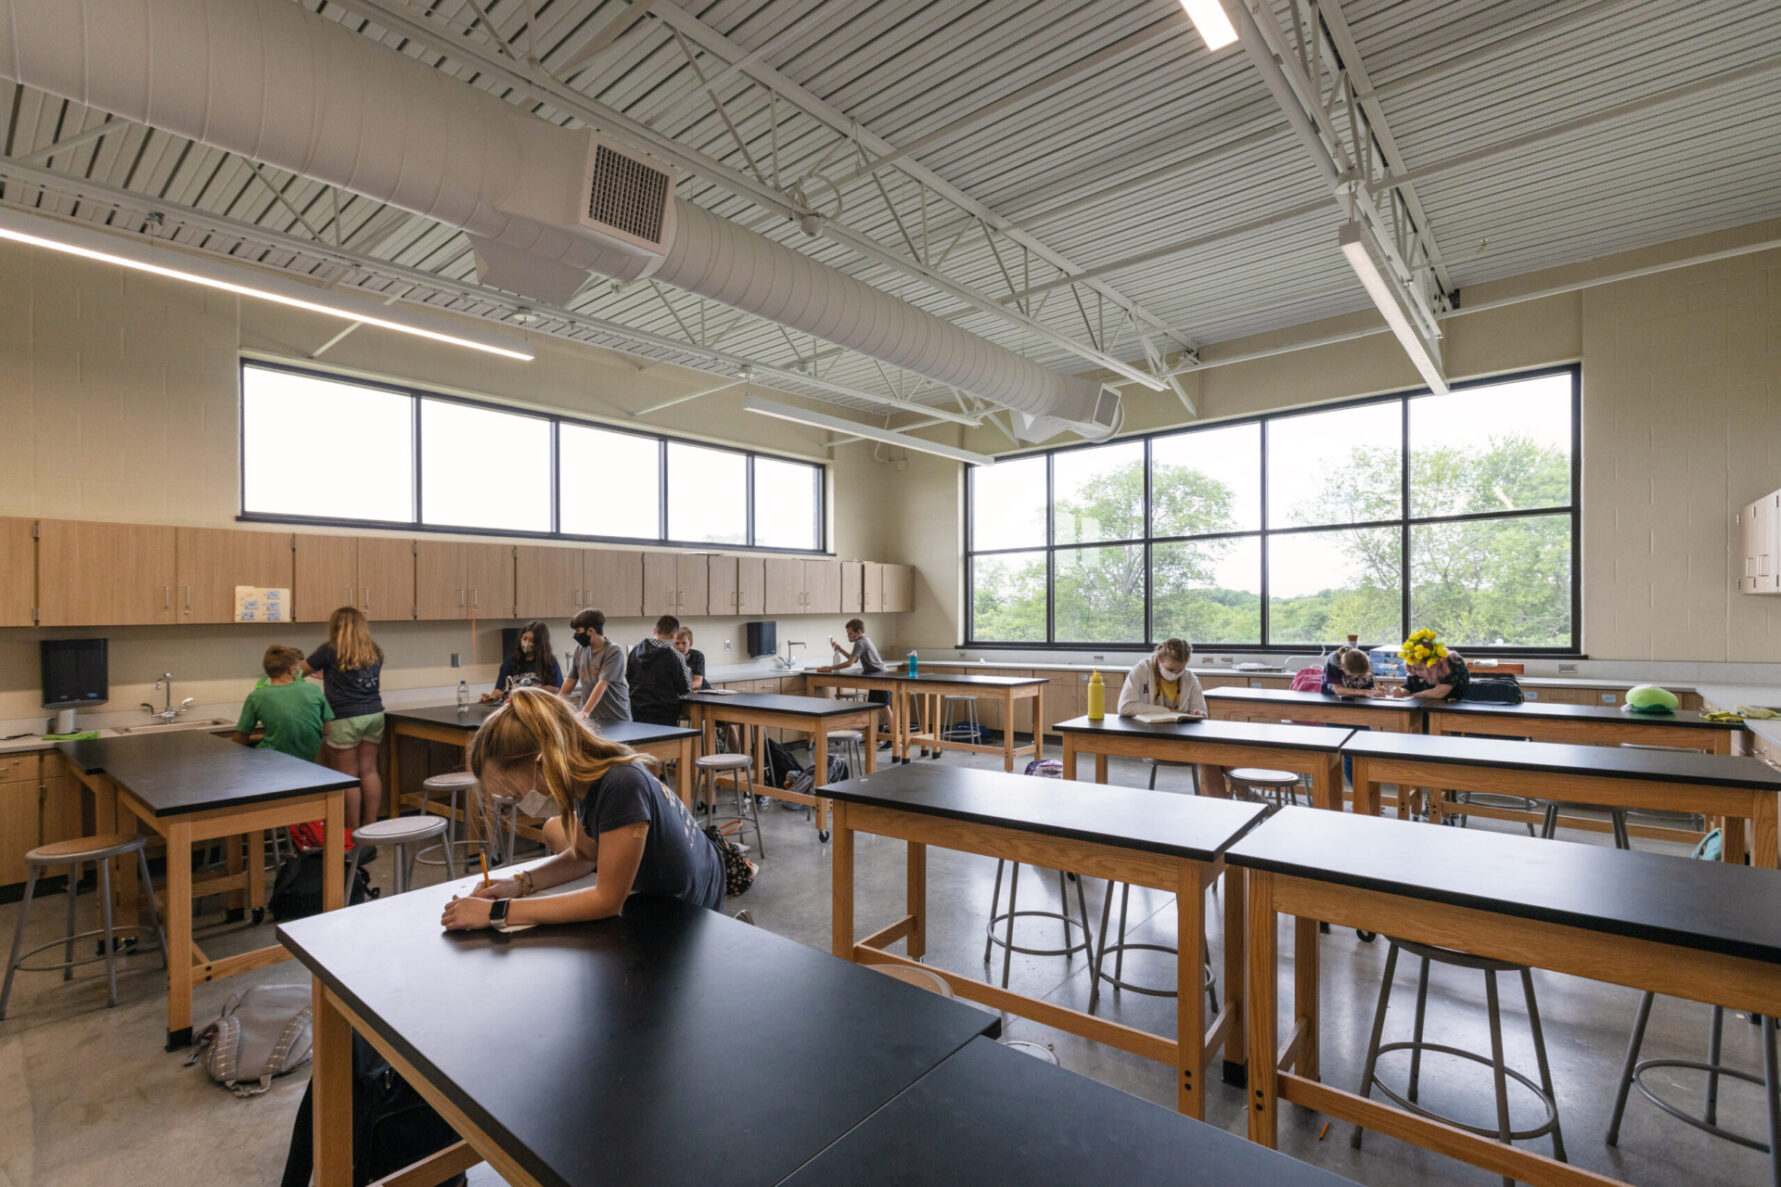 Students learning in a classroom at Basehor Linwood Middle School, built by McCownGordon